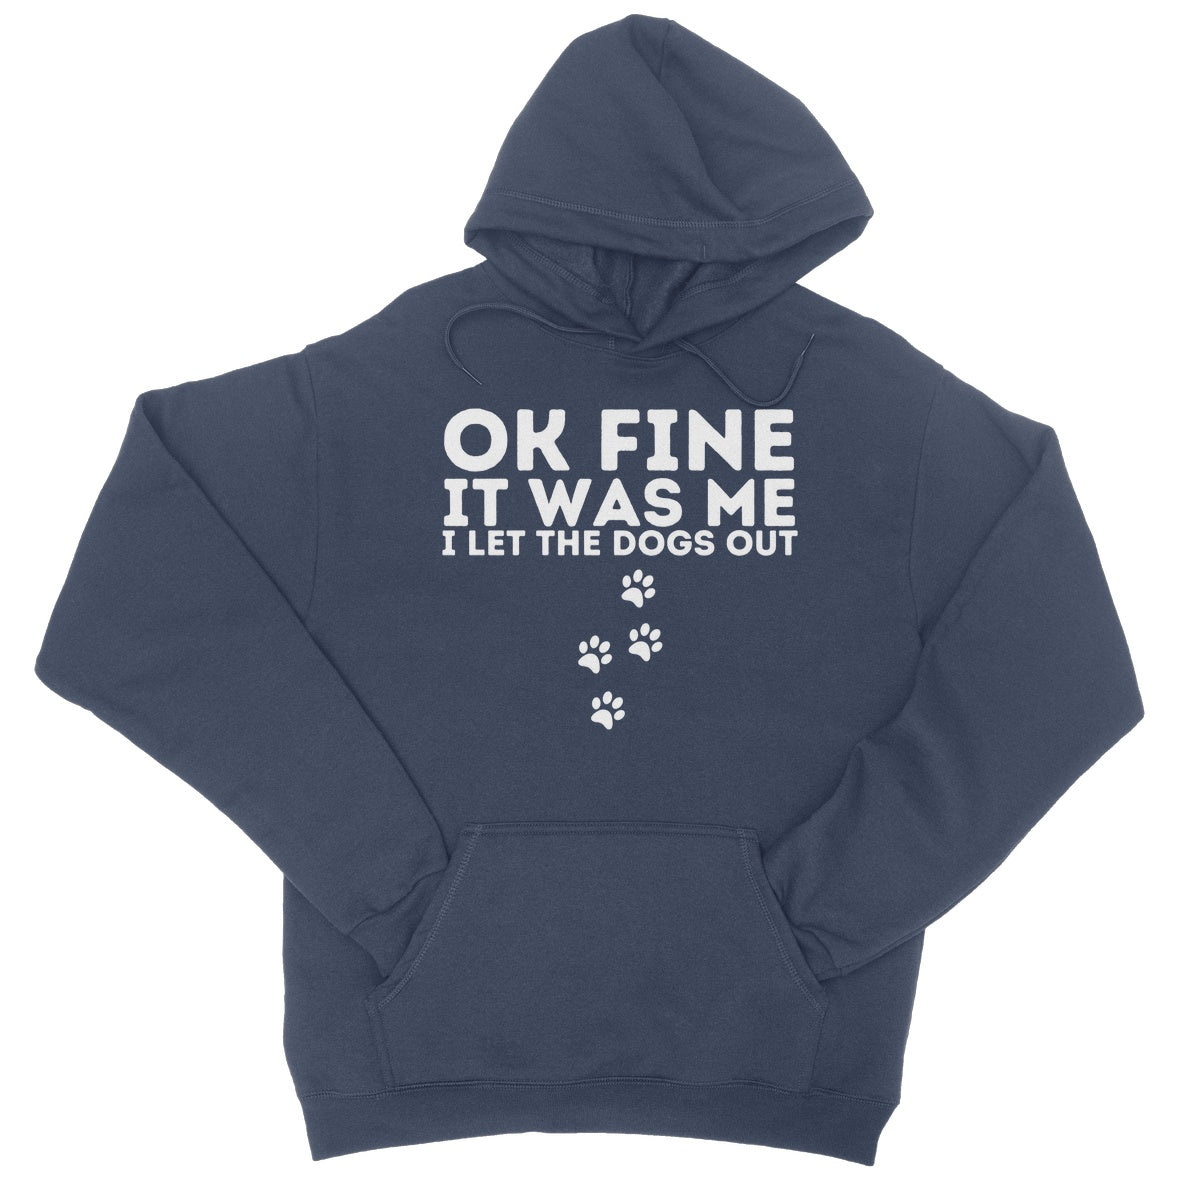 I let the dogs out hoodie navy